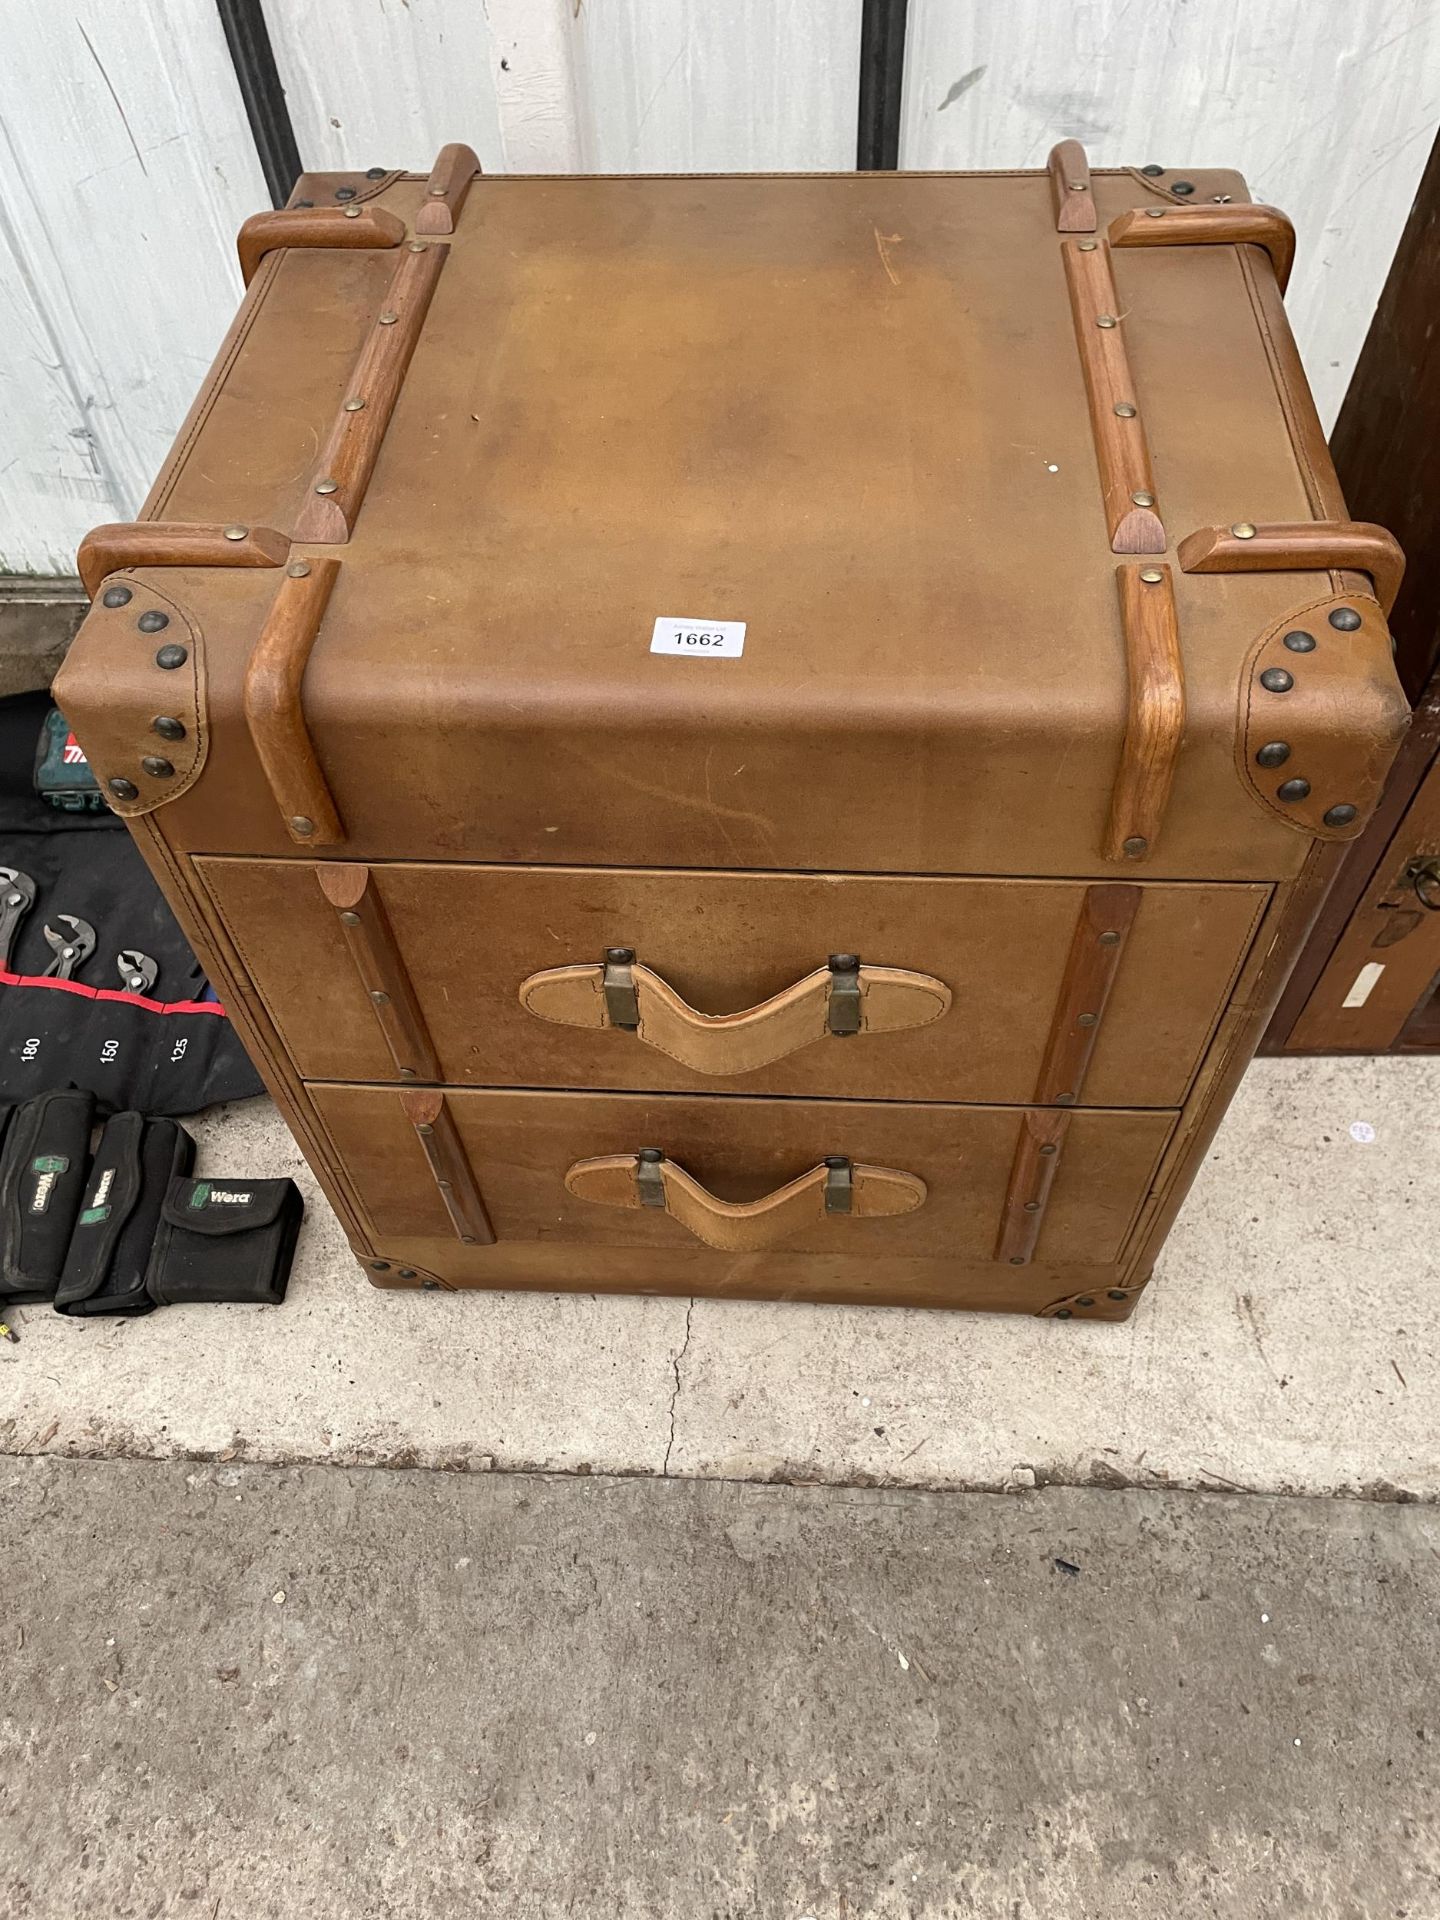 A CHEST OF TWO DRAWERS IN THE FORM OF A SUITCASE